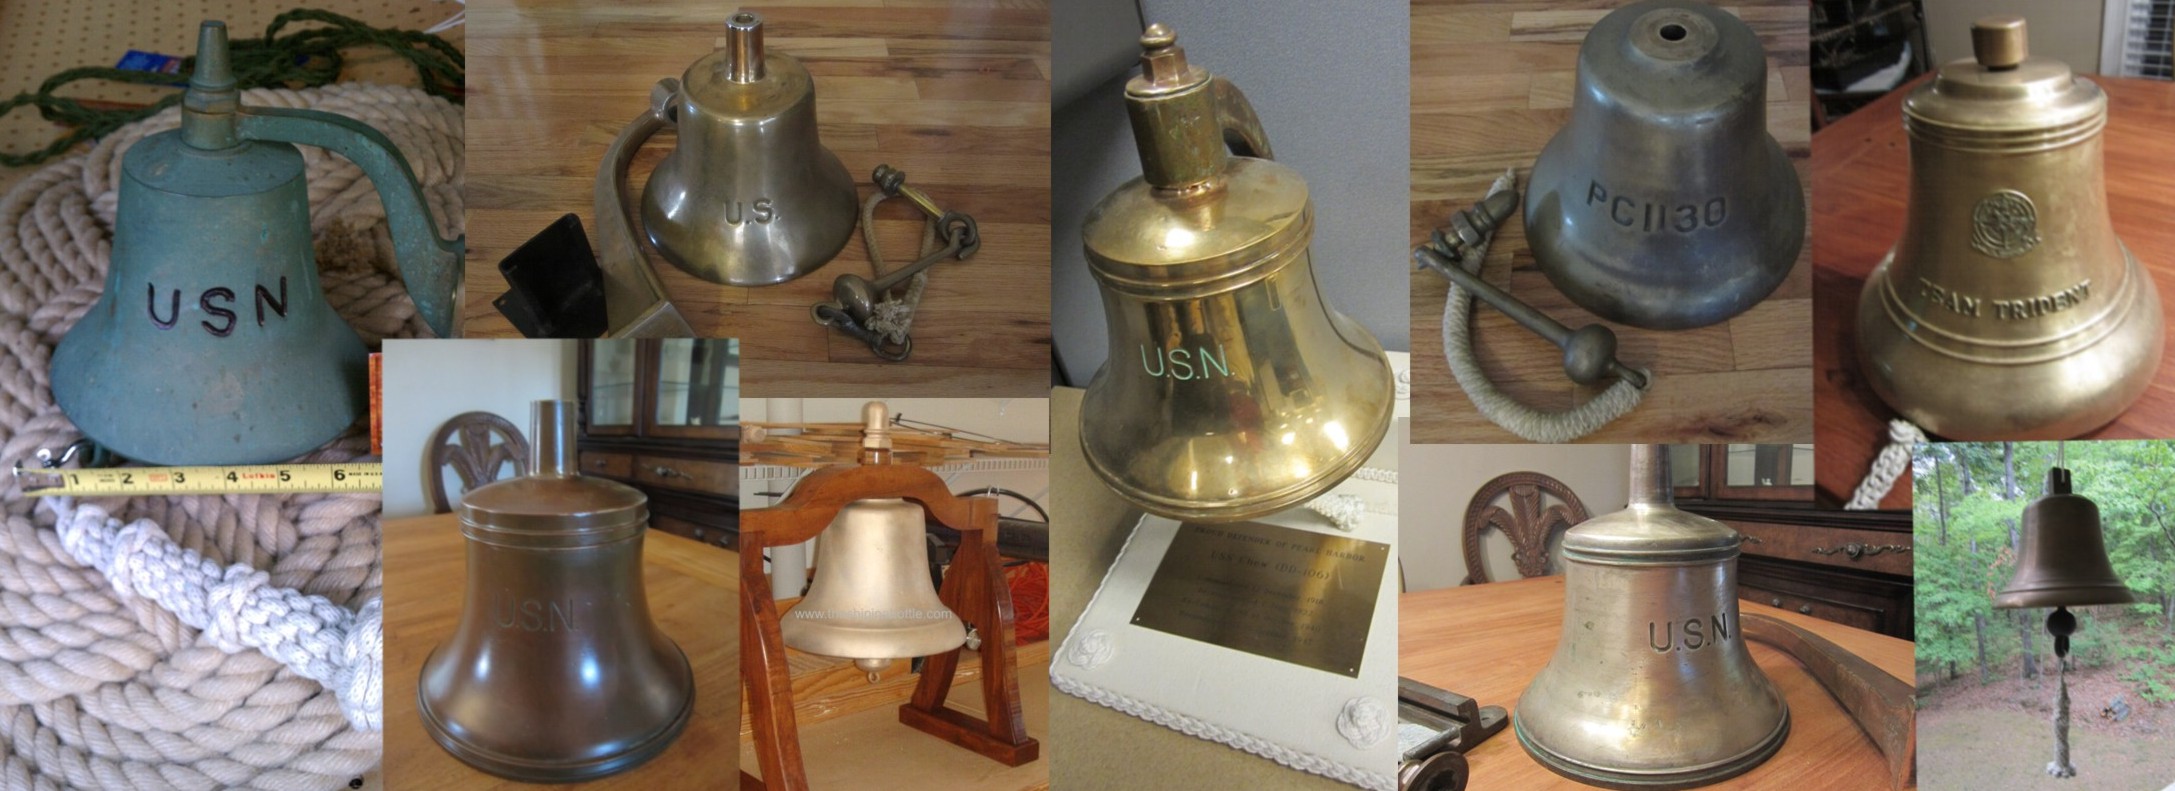 Heavy Vintage US Navy USN Ship Bell Clapper Bronze Military Nautical